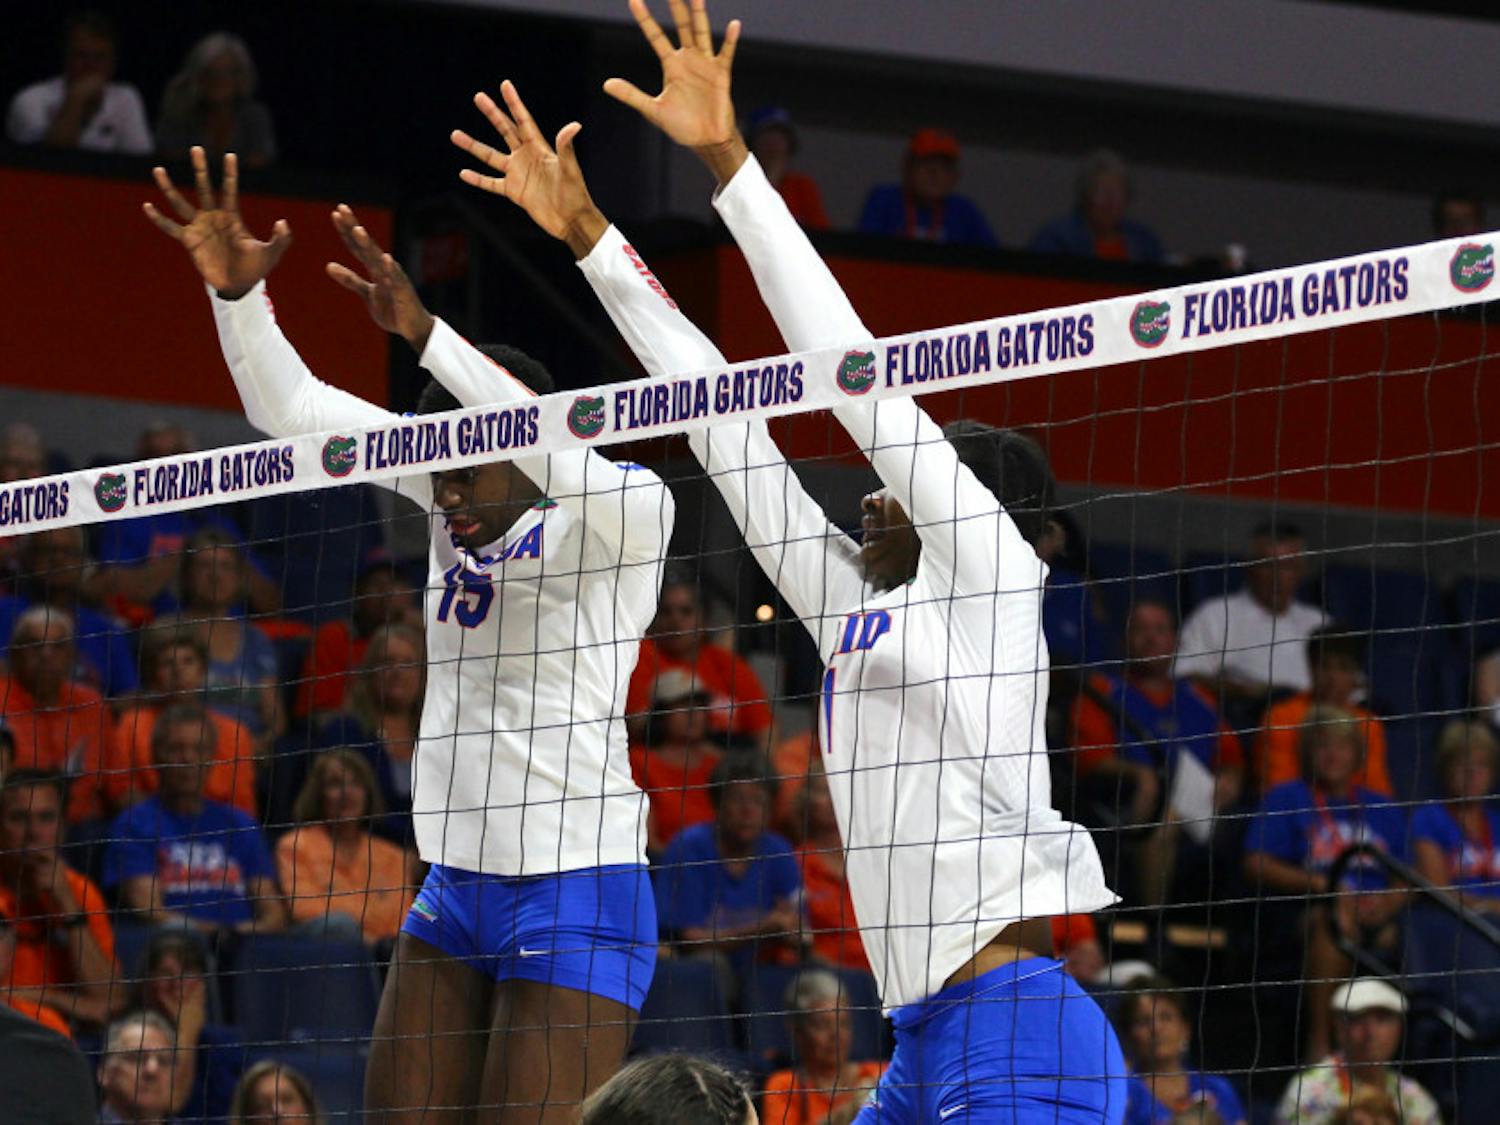 Shainah Joseph (15) had 15 kills in UF’s match against Texas A&amp;M earlier in the season and was voted SEC Co-Offensive Player of the Week on Nov. 13.